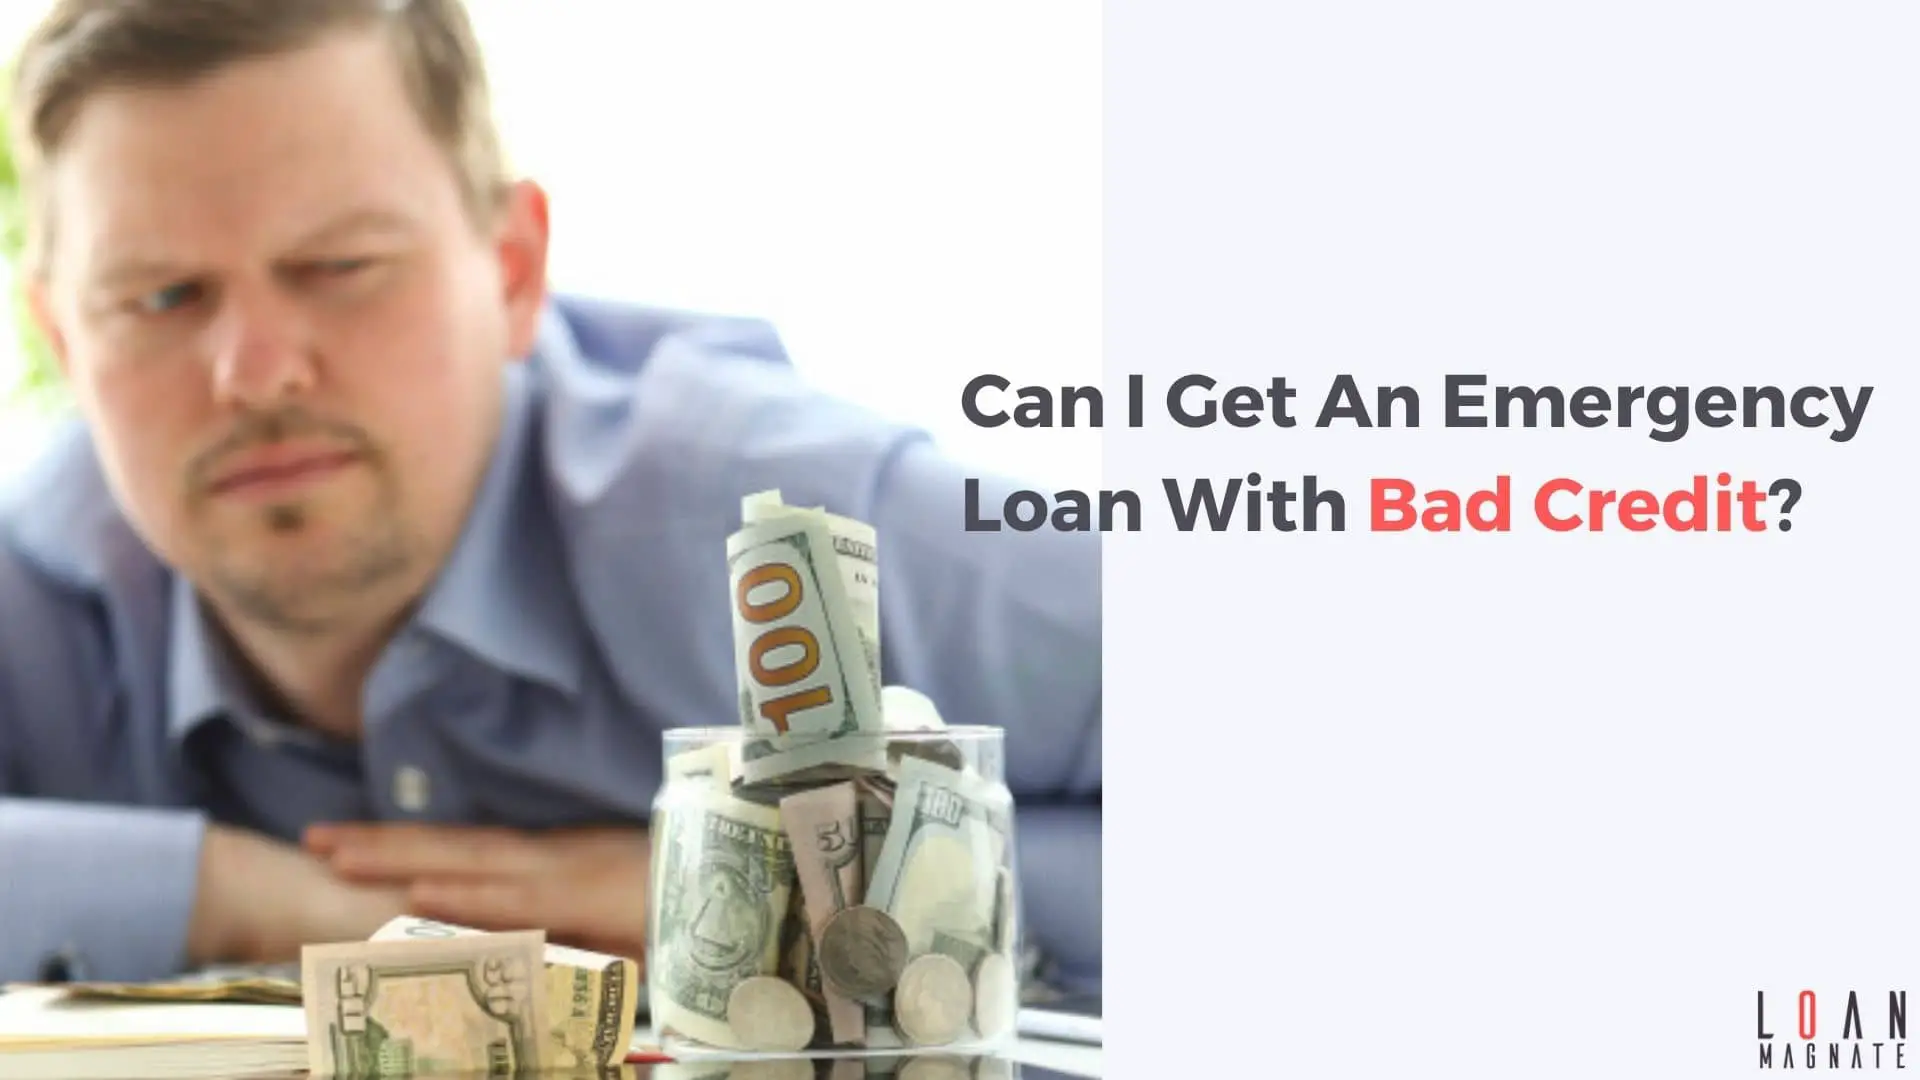 Can I Get an Emergency Loan with Bad Credit?